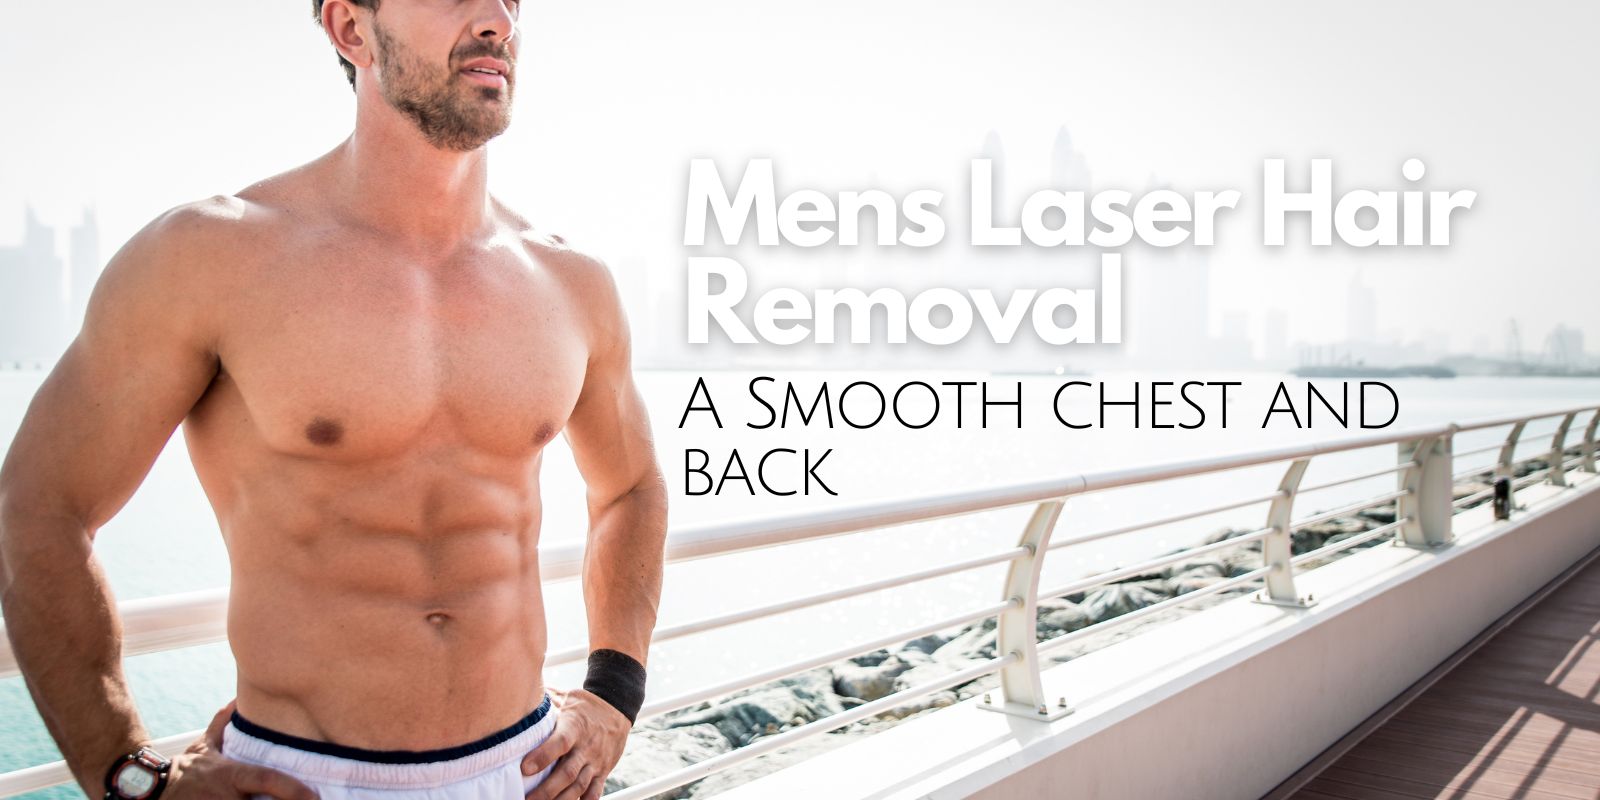 Best mens laser hair removal Victoria BC. Chest, Back.